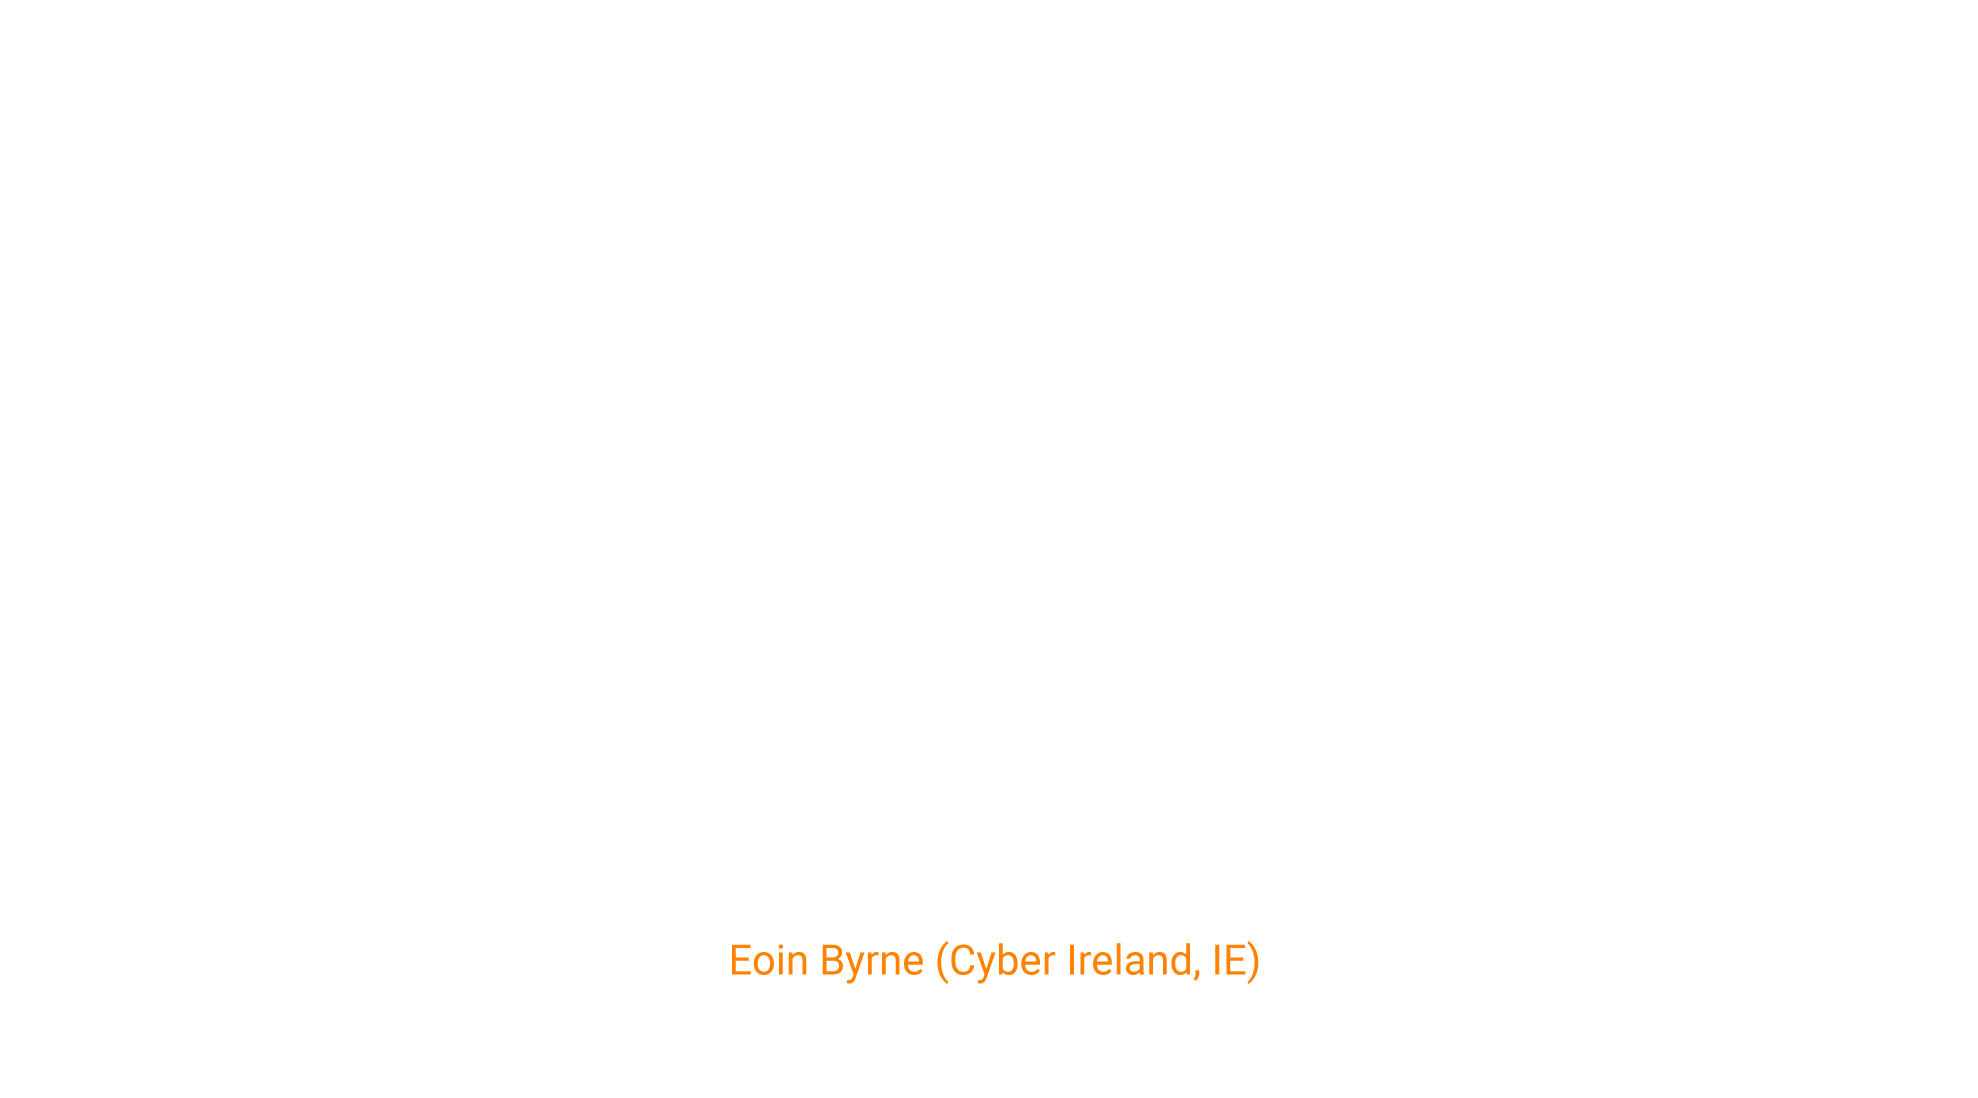 Cyber Ireland - Addressing Cyber Crime Through Industry-Academia-Government Collaboration